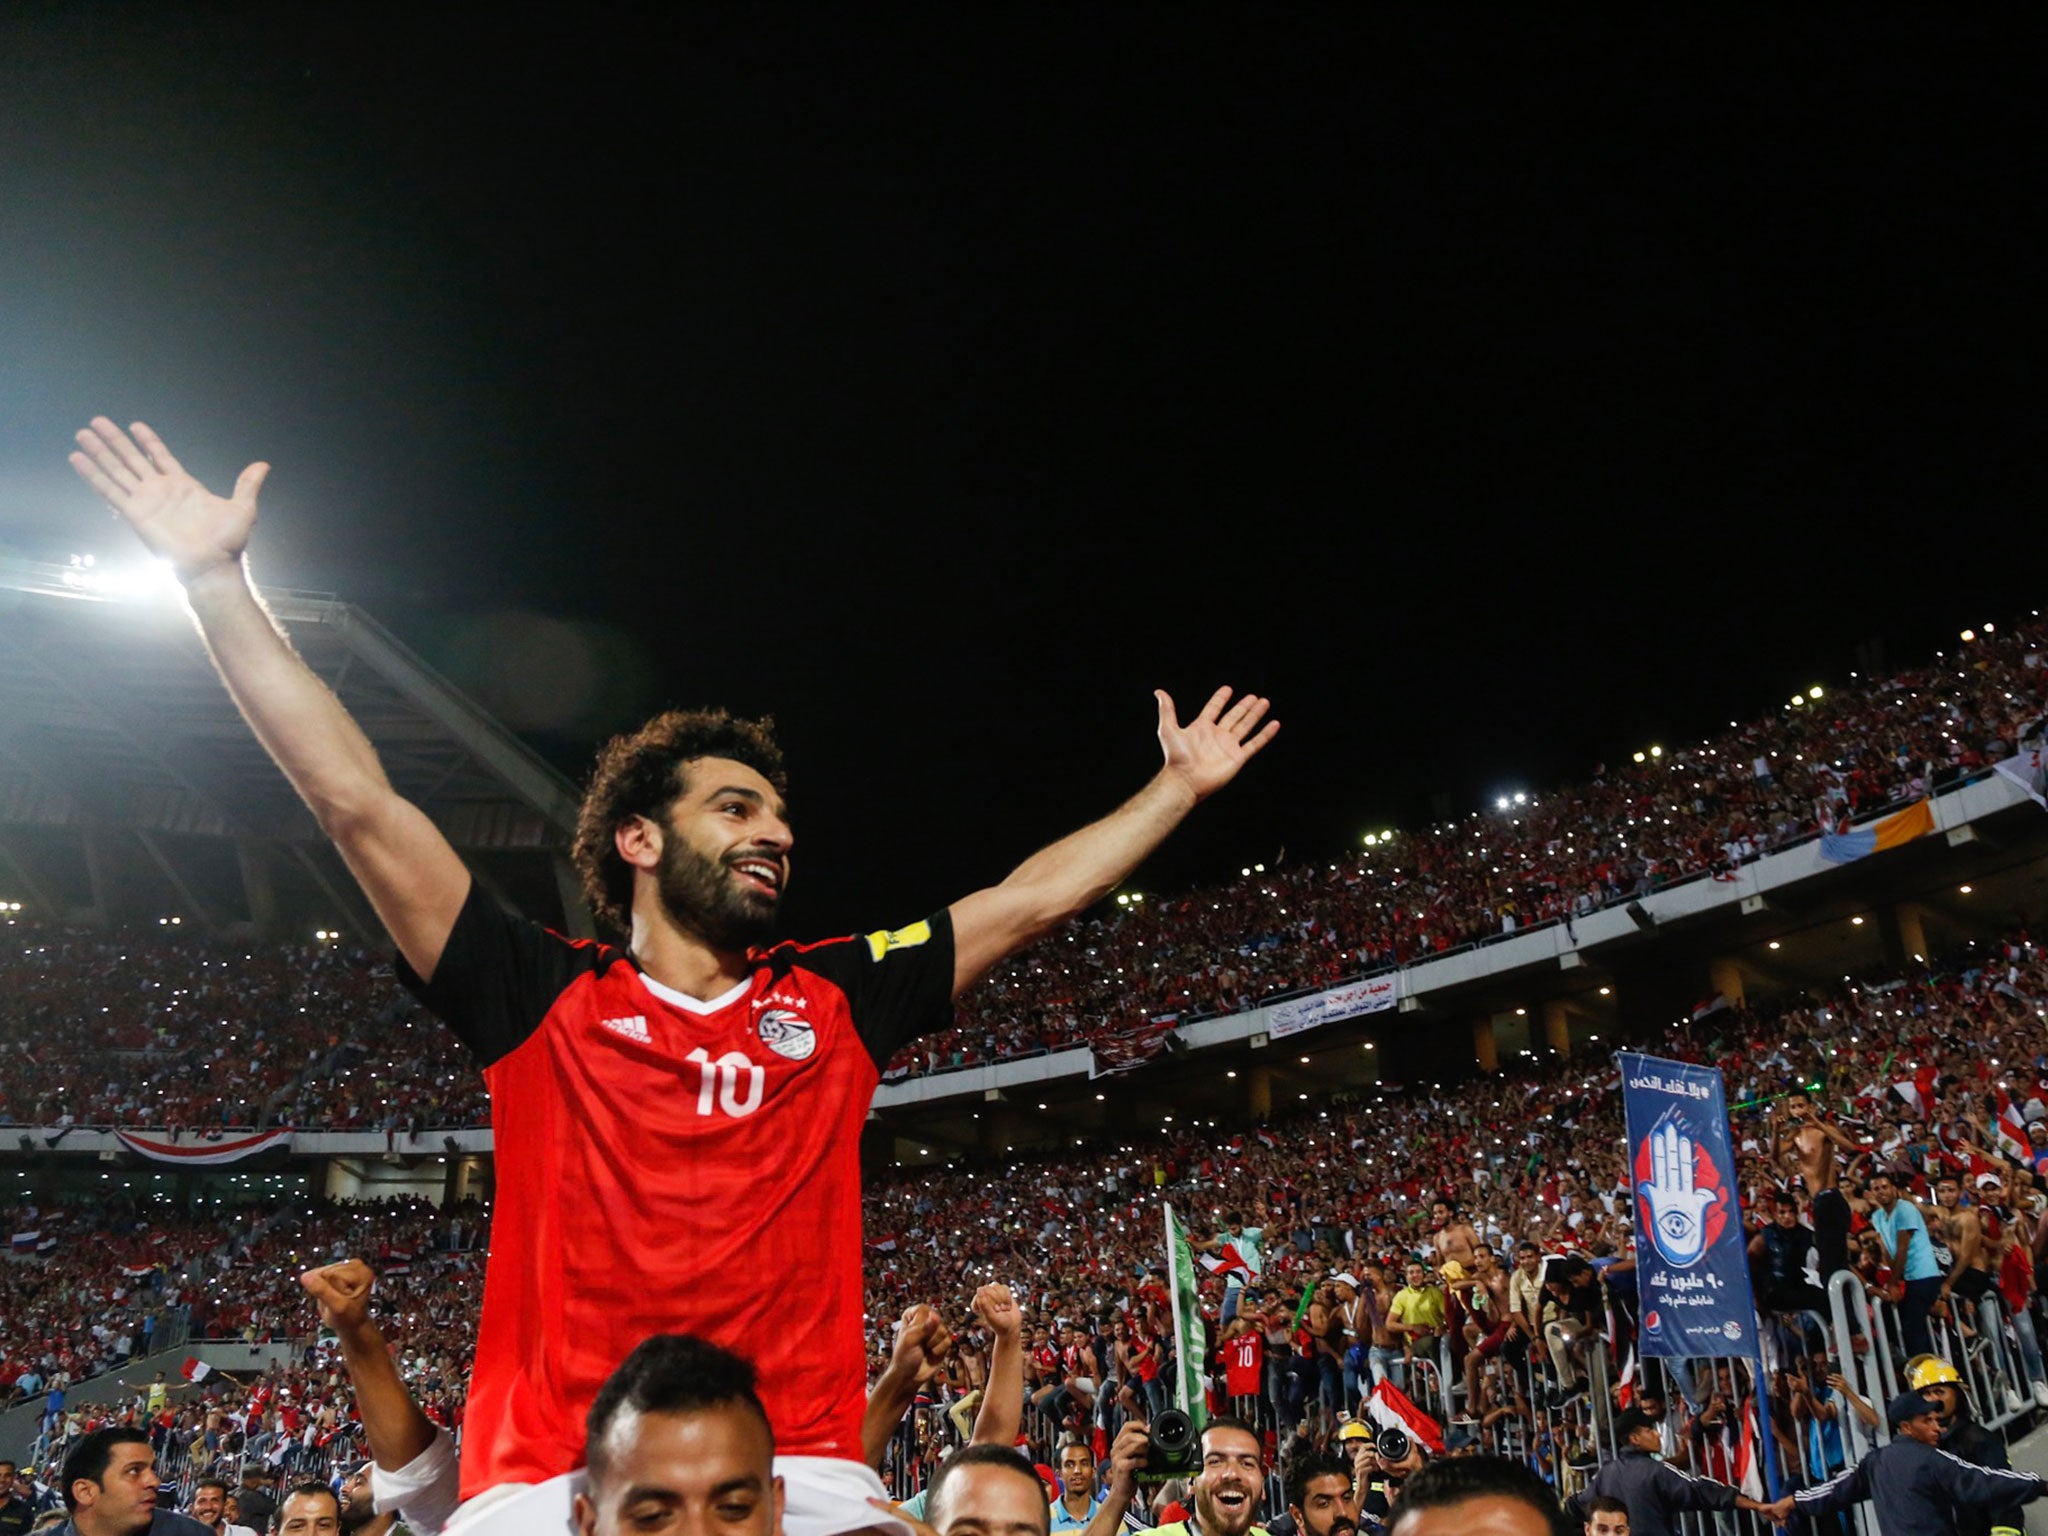 &#13;
Salah helped guide Egypt to their first World Cup since 1990 &#13;